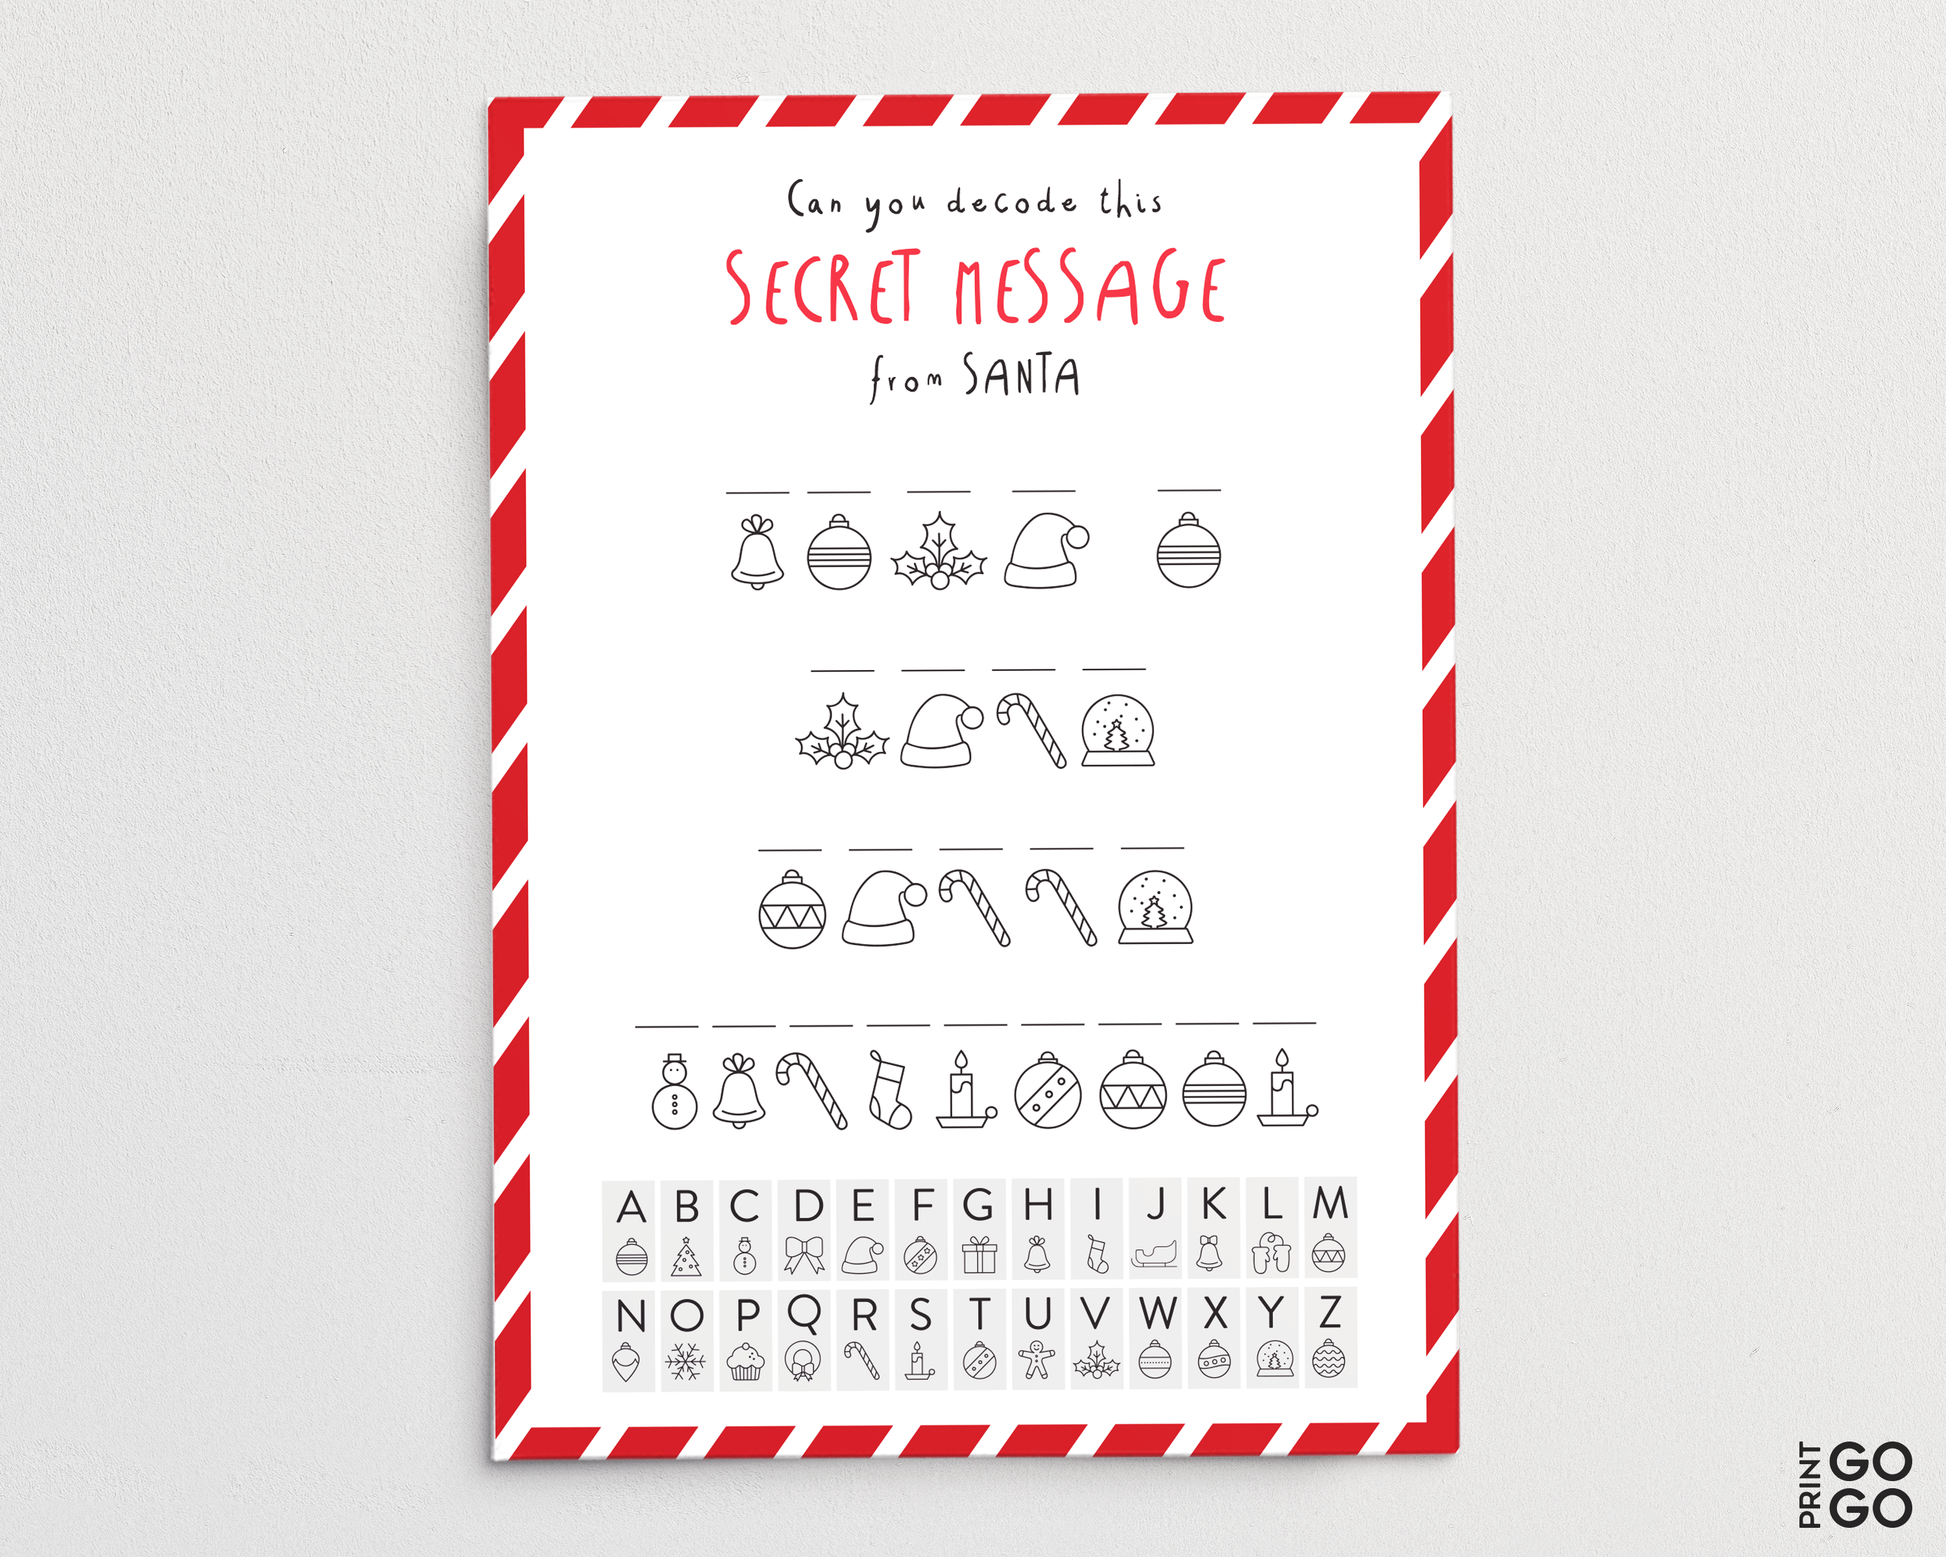 Coded Secret Messages from Santa